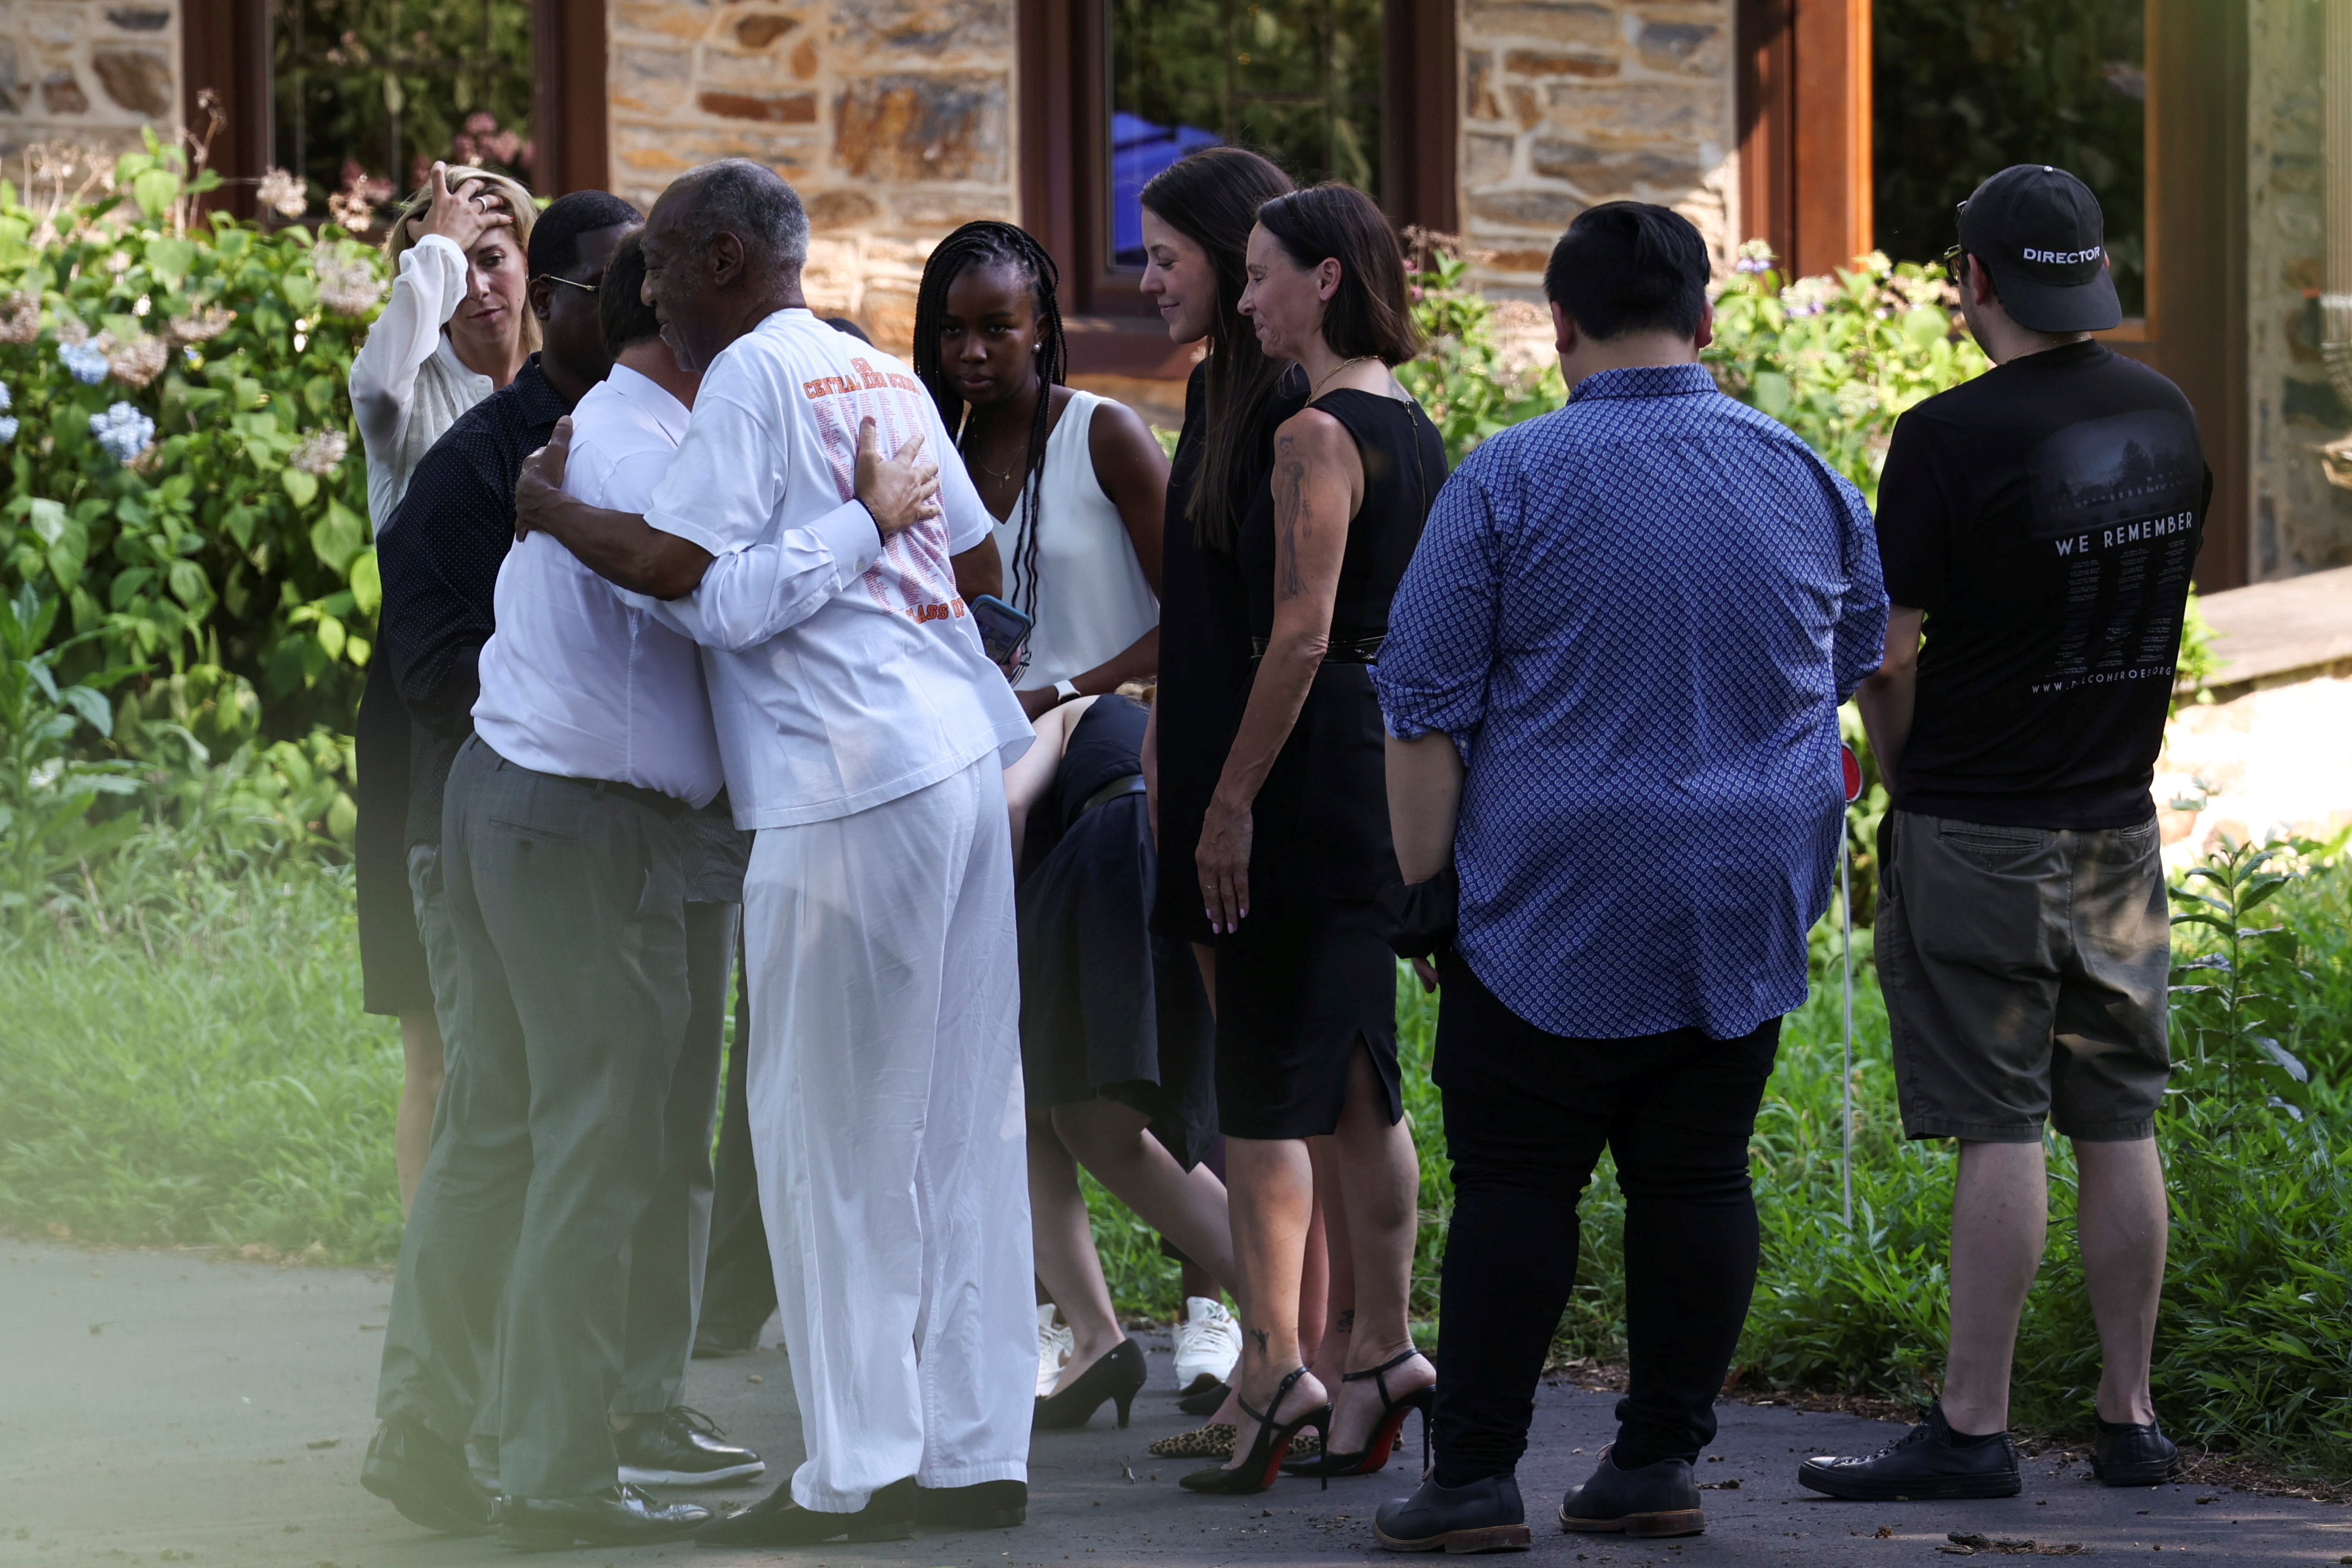 Bill Cosby is greeted outside his house after Pennsylvania's highest court overturned his sexual assault conviction and ordered him released from prison immediately, in Elkins Park